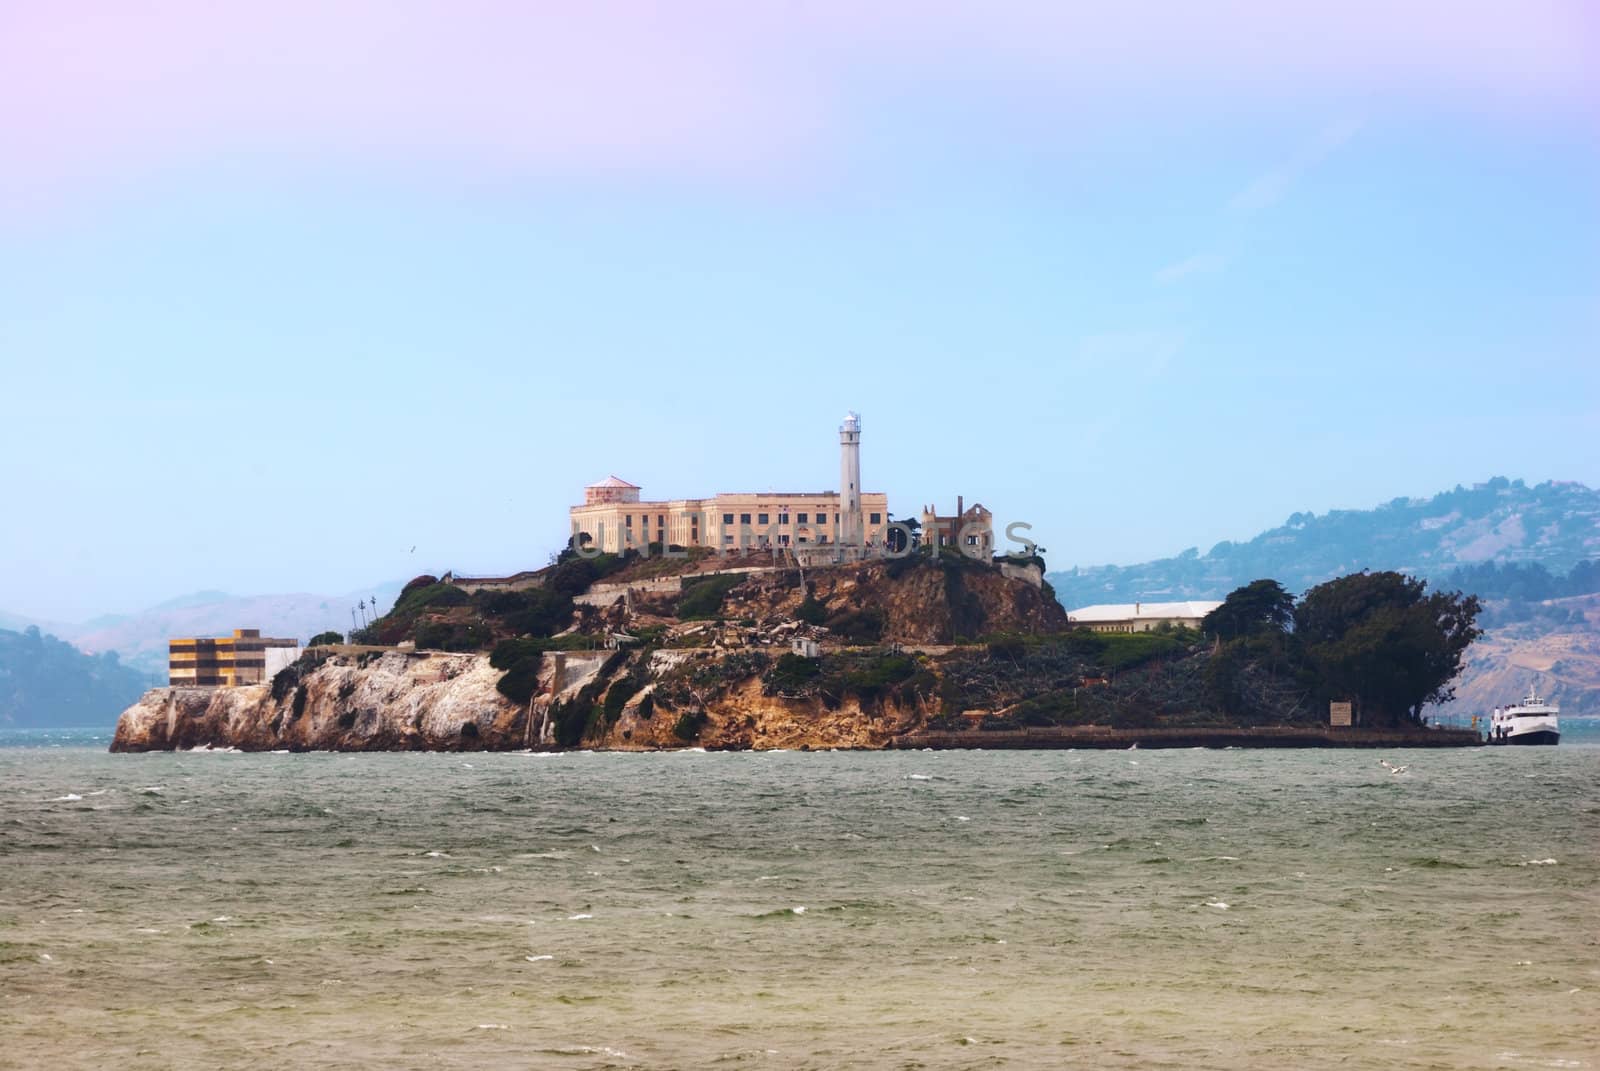 Alcatraz Island and Prison in San Francisco Bay in late afternoon with a ferry on the right side.